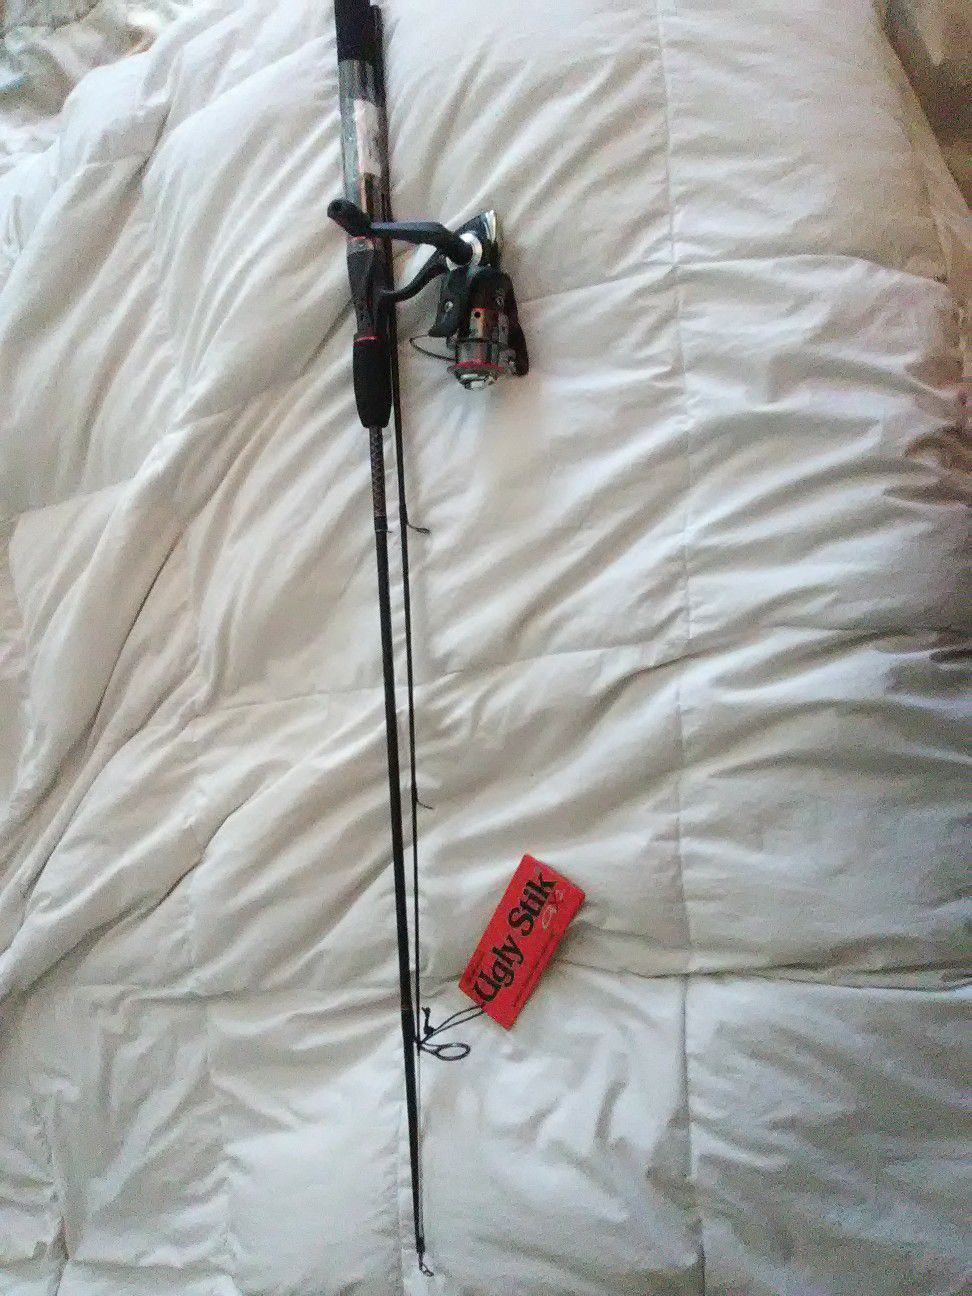 Ugly Stik Shakespeare GX2 fishing rod and reel.